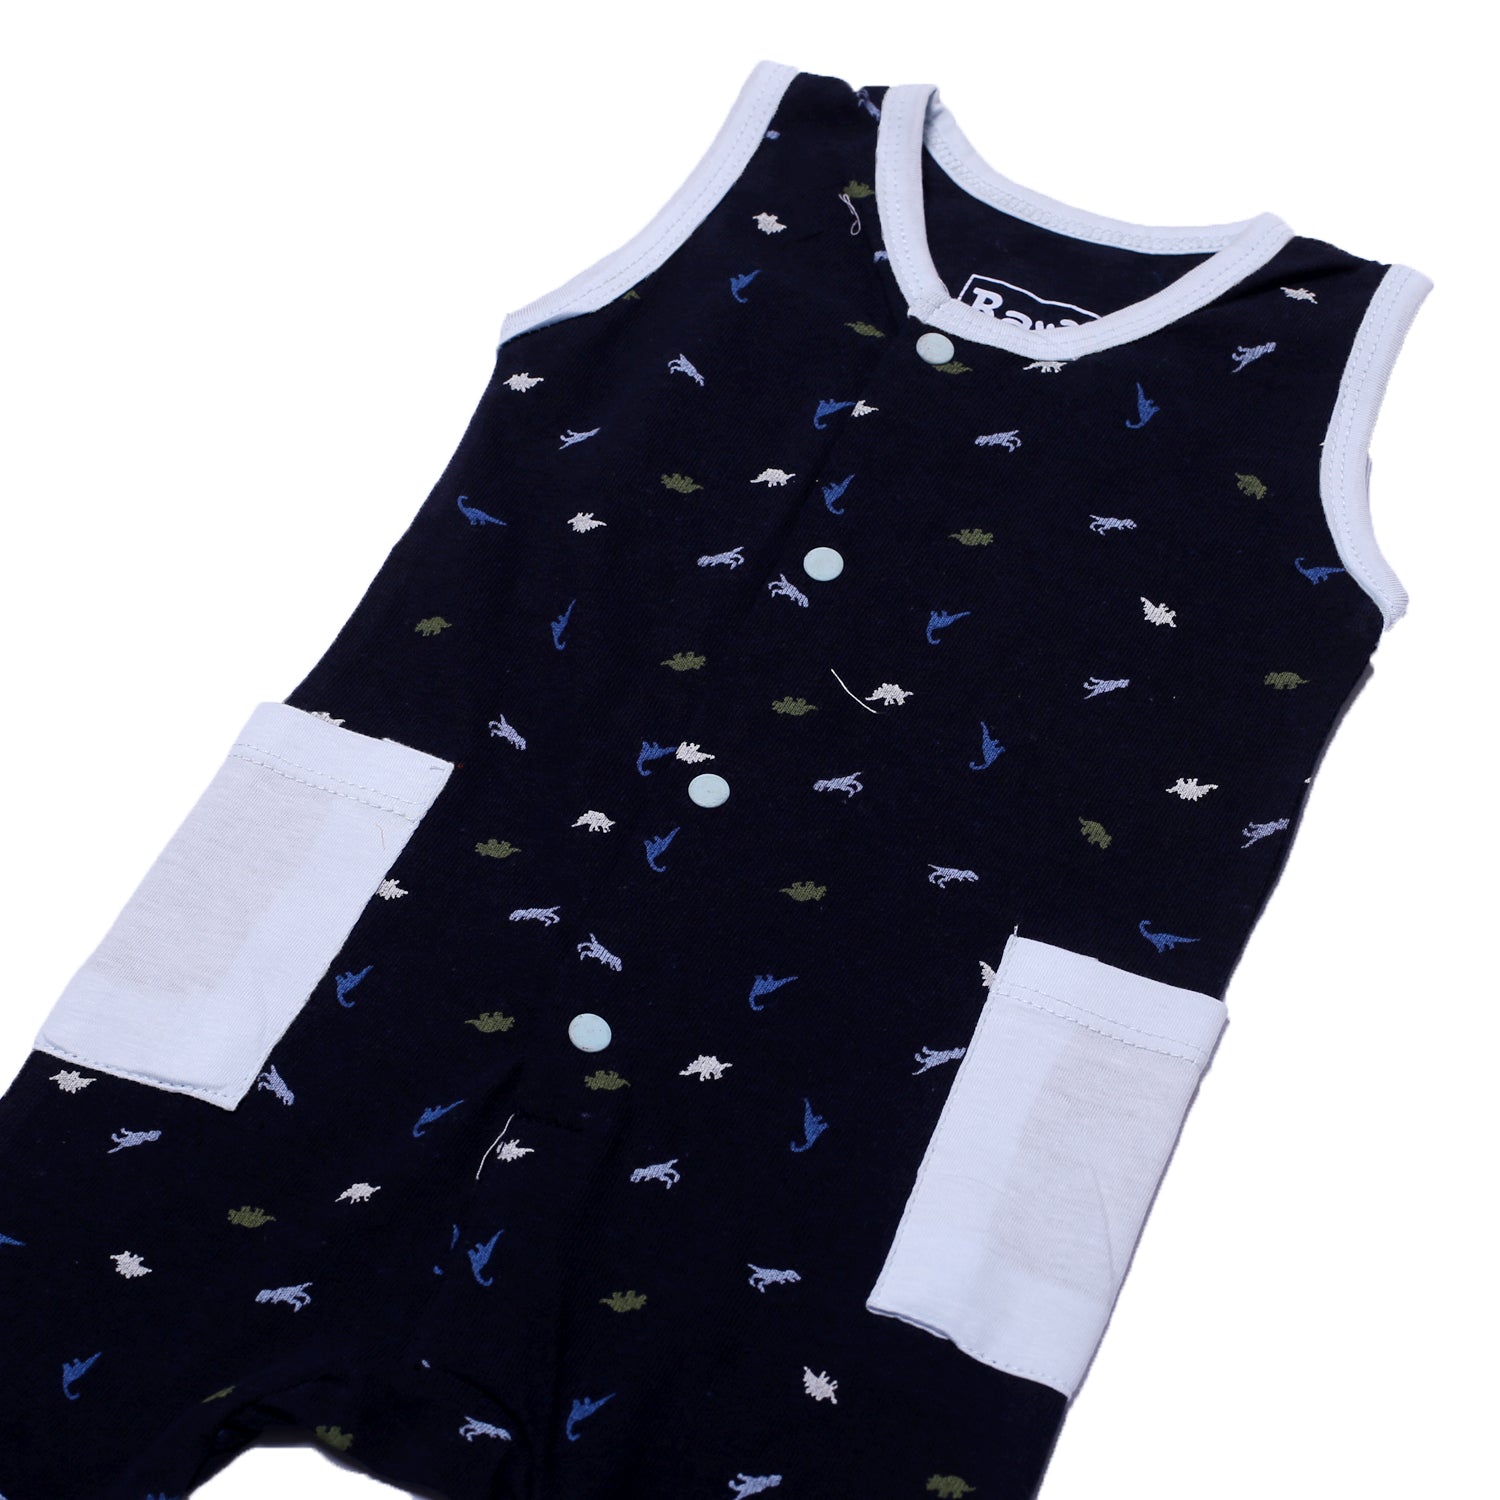 NAVY BLUE FULL BODY SLEEVE LESS DINO PRINTED WITH SKY BLUE POCKETS ROMPER